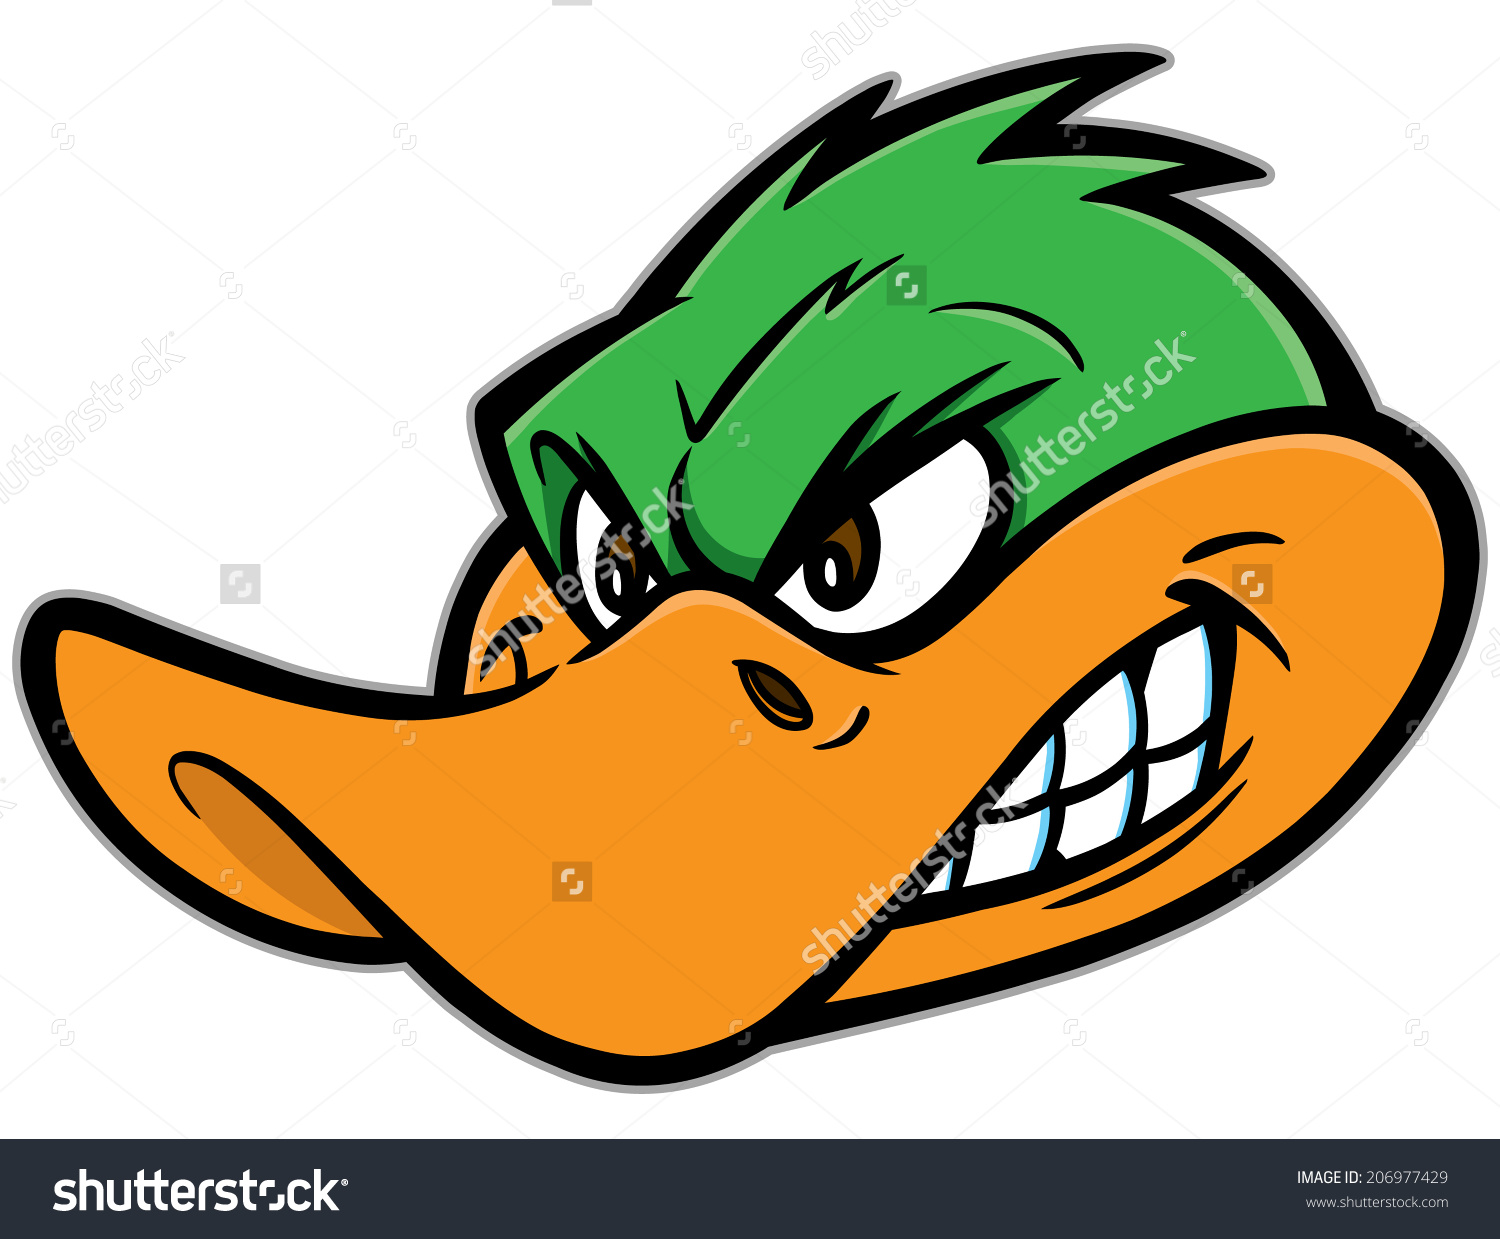 Nice Images Collection: Angry Duck Desktop Wallpapers